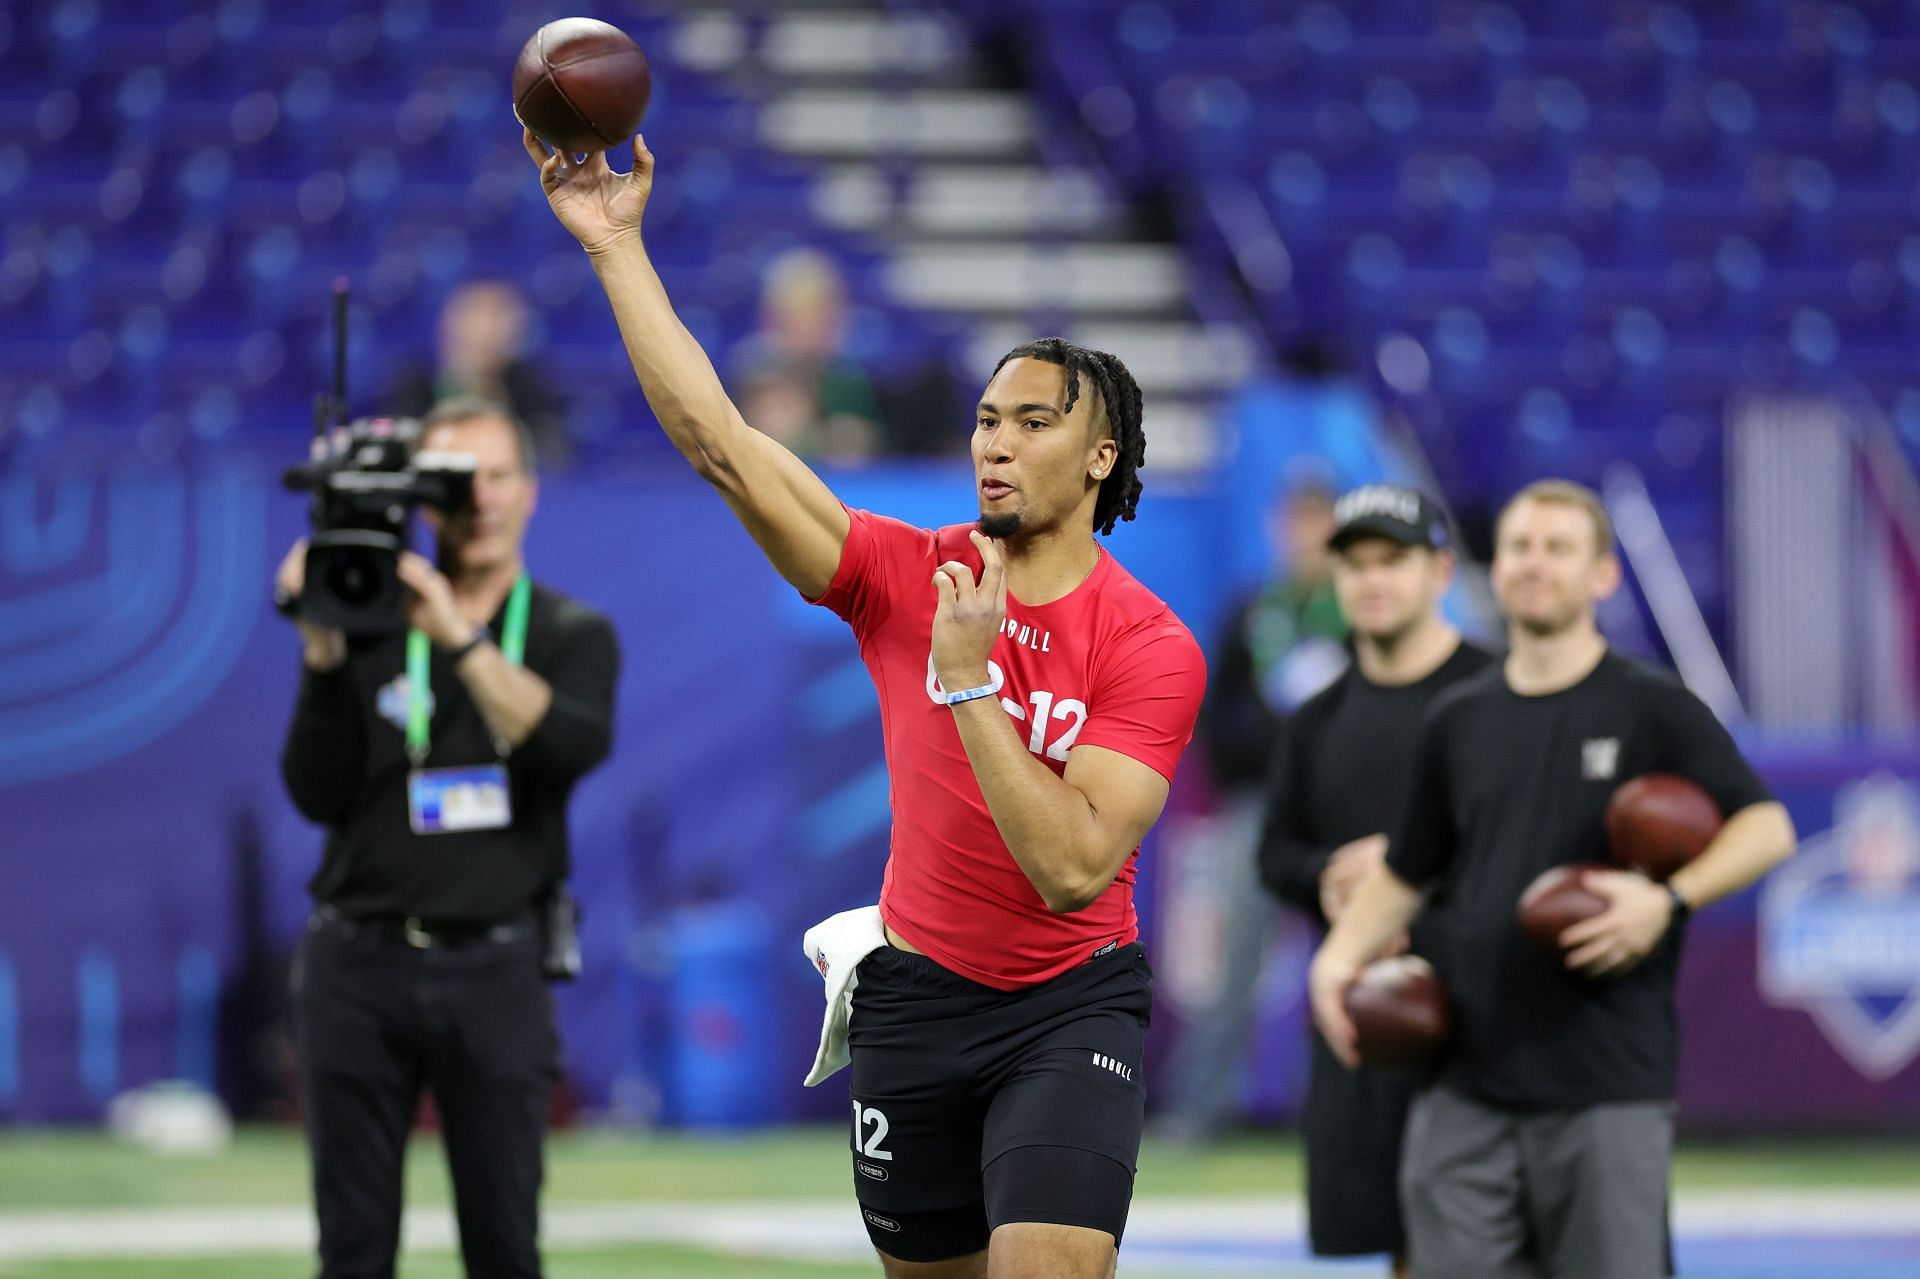 2023 NFL mock draft: Who will Houston Texans pick at 2 and 12?